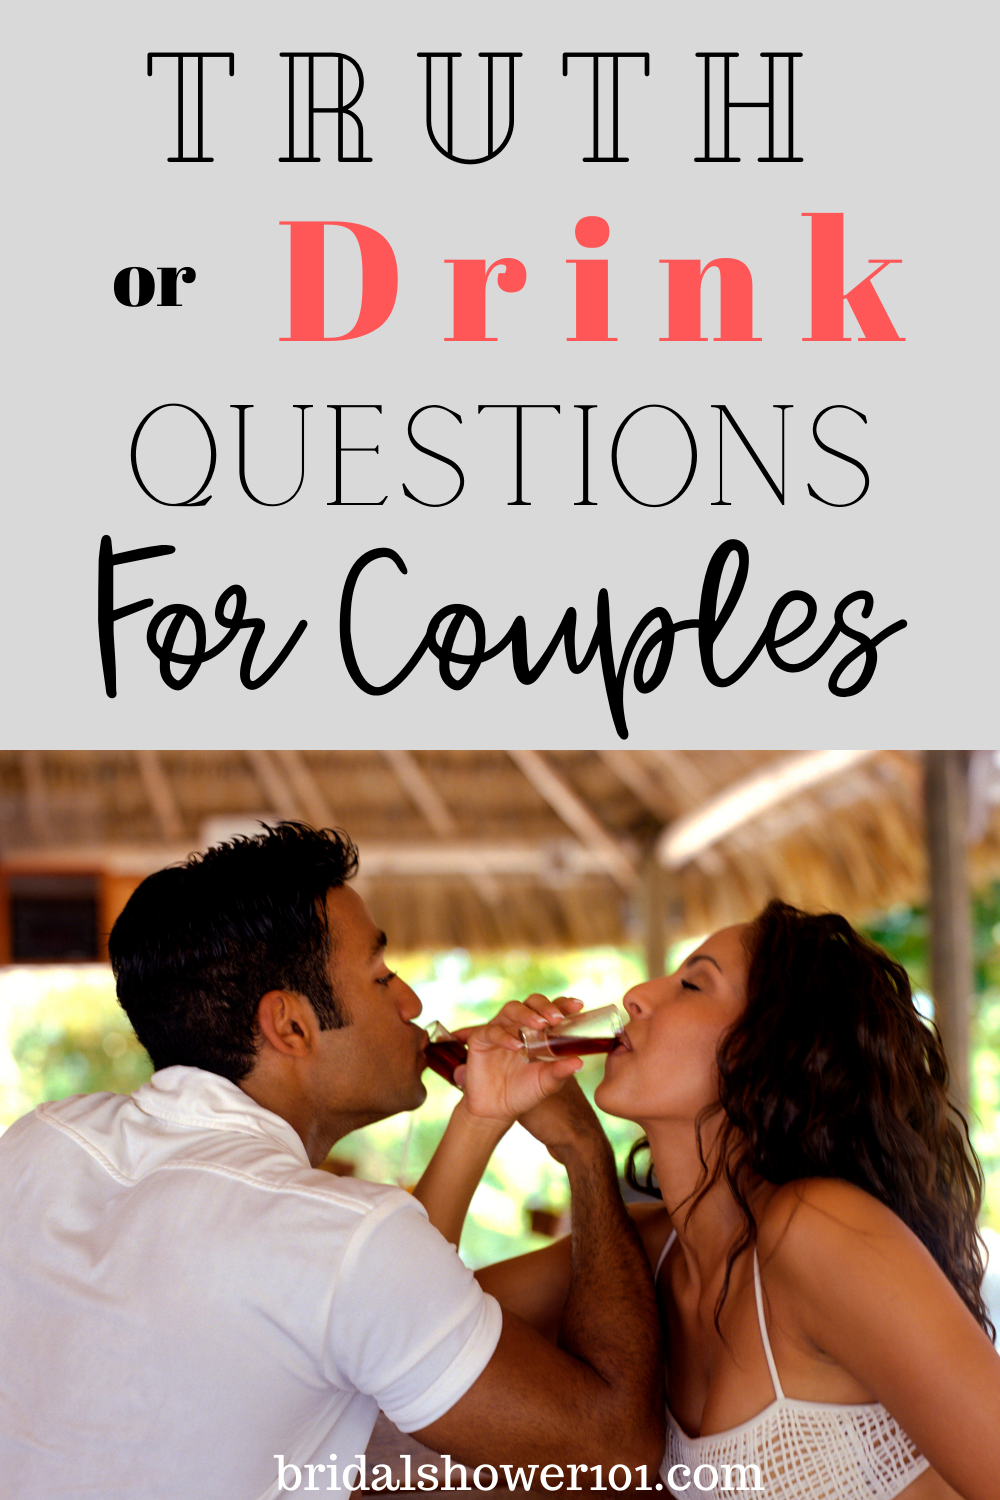 truth or drink questions rated r